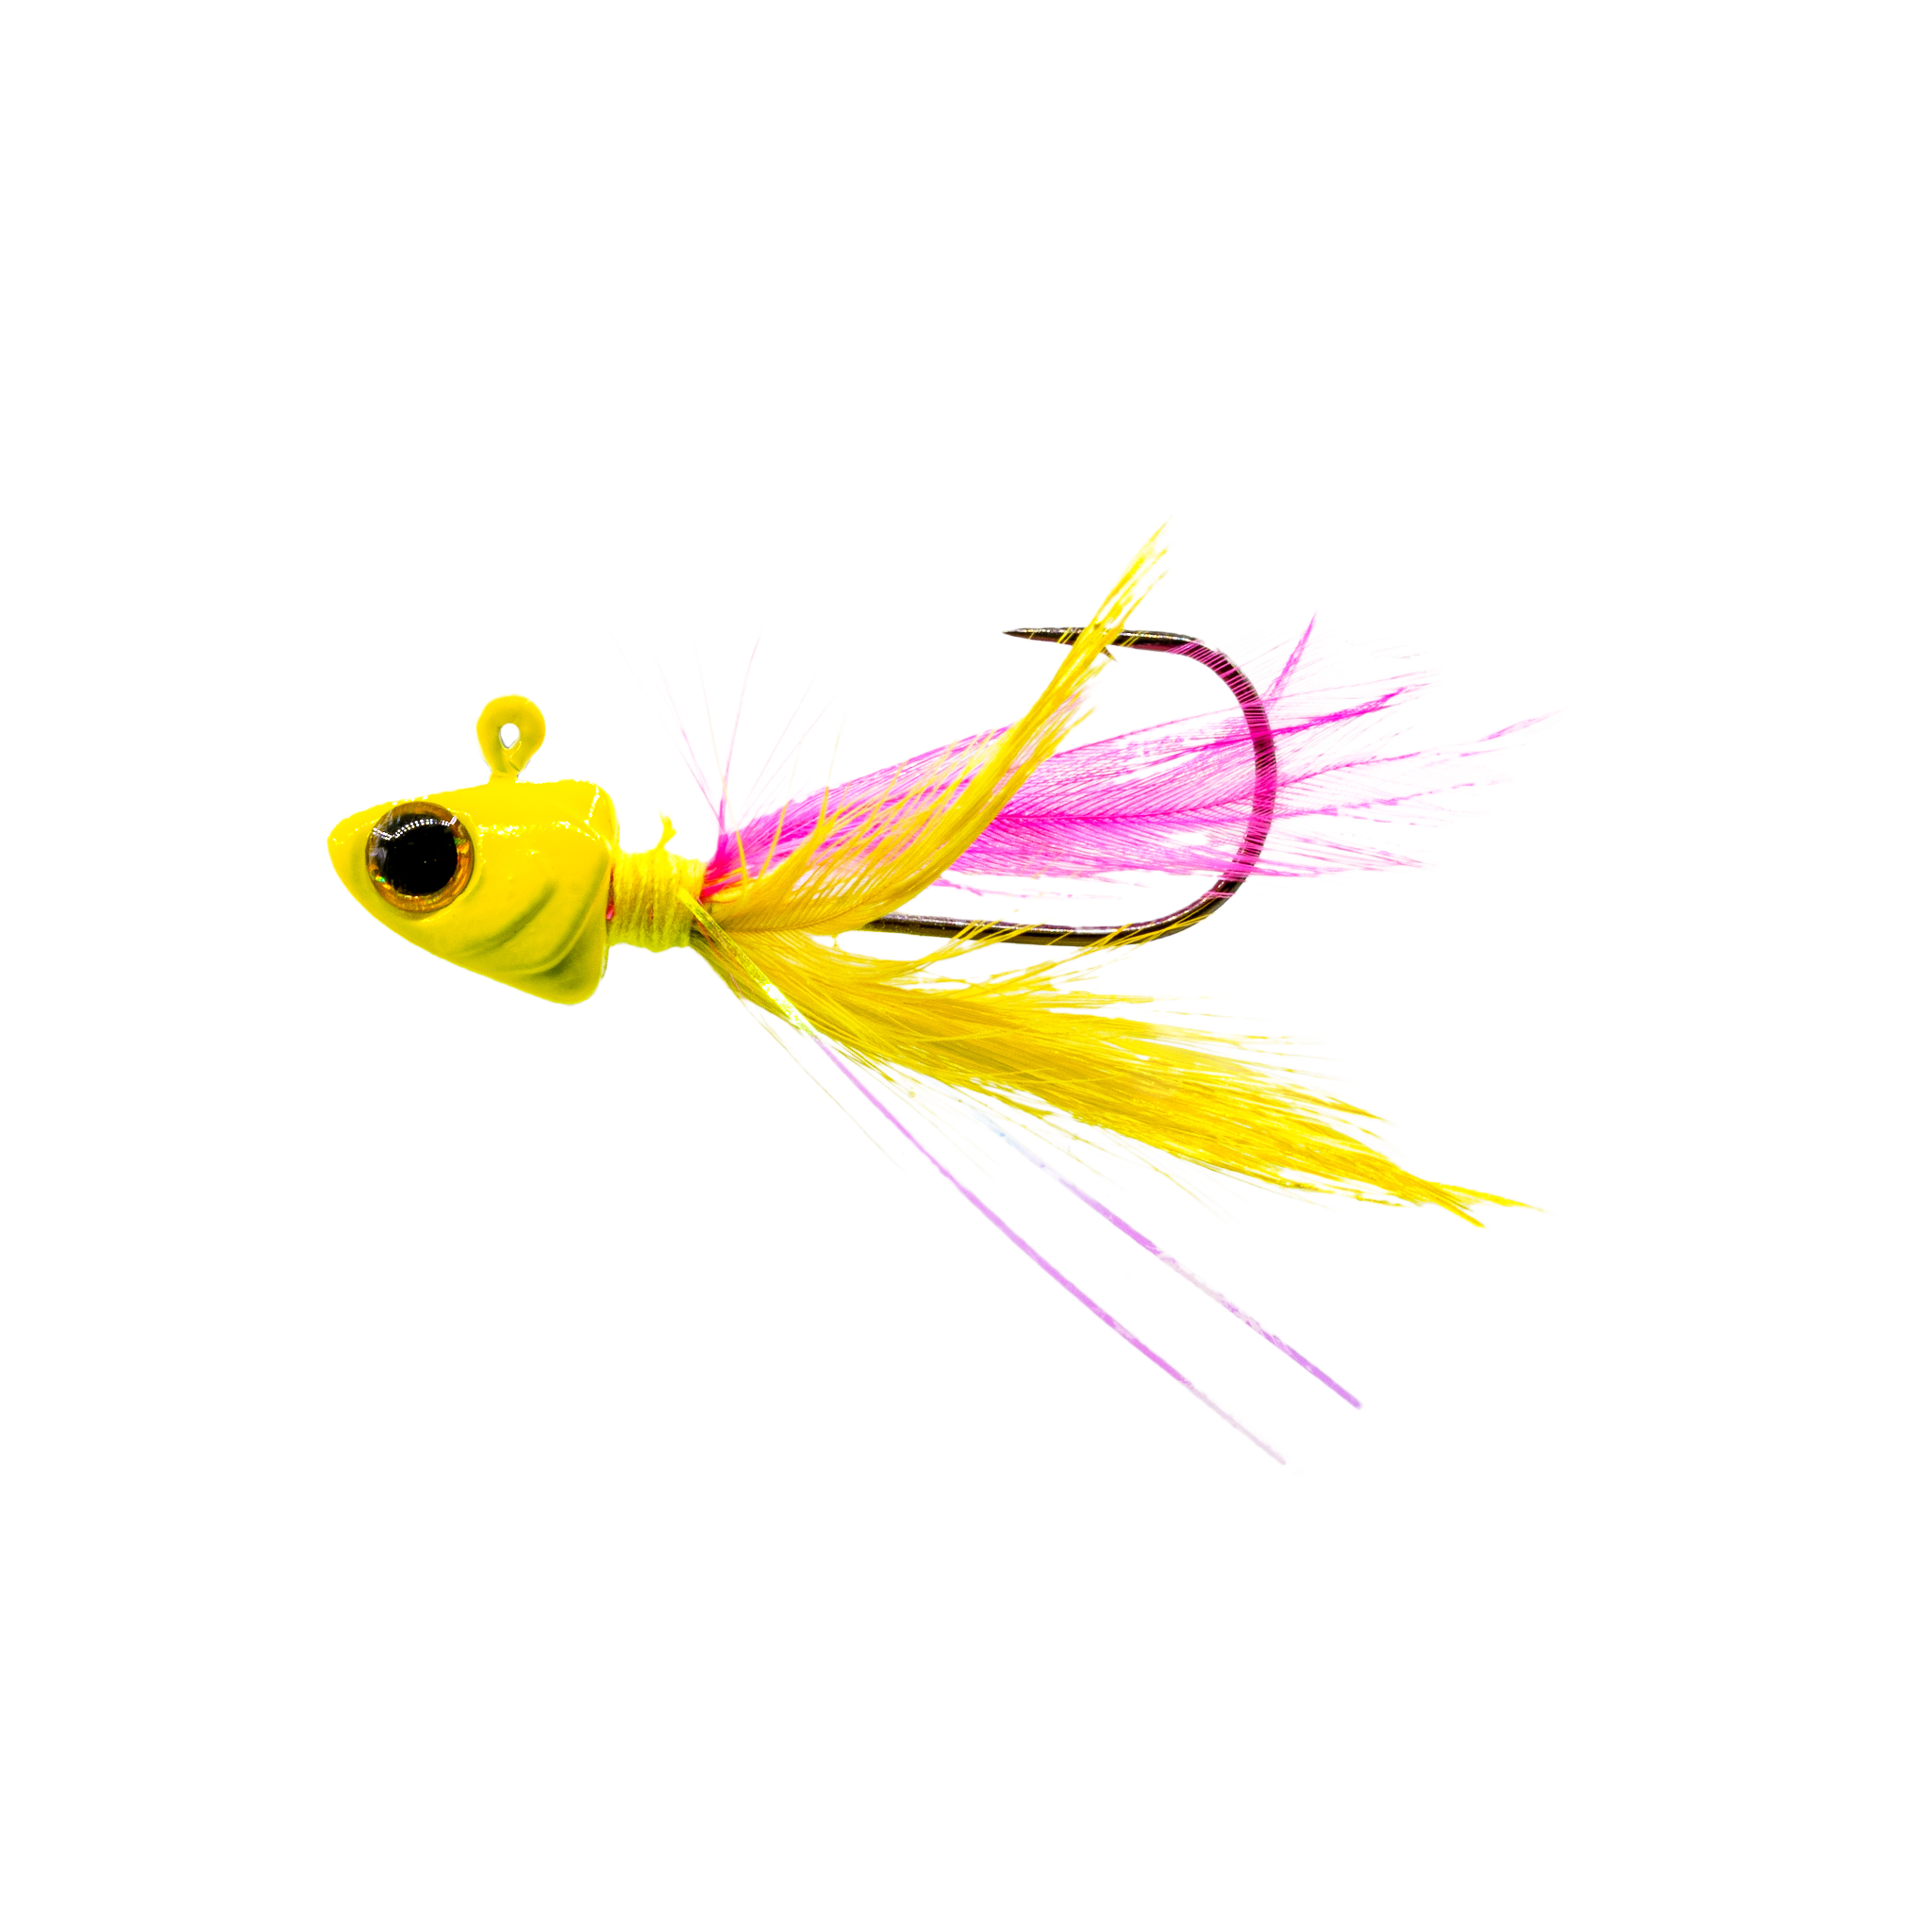 Panfish - Crappie Pop-Eyed Tumble Bug - 6 Pack – Stopper Lures